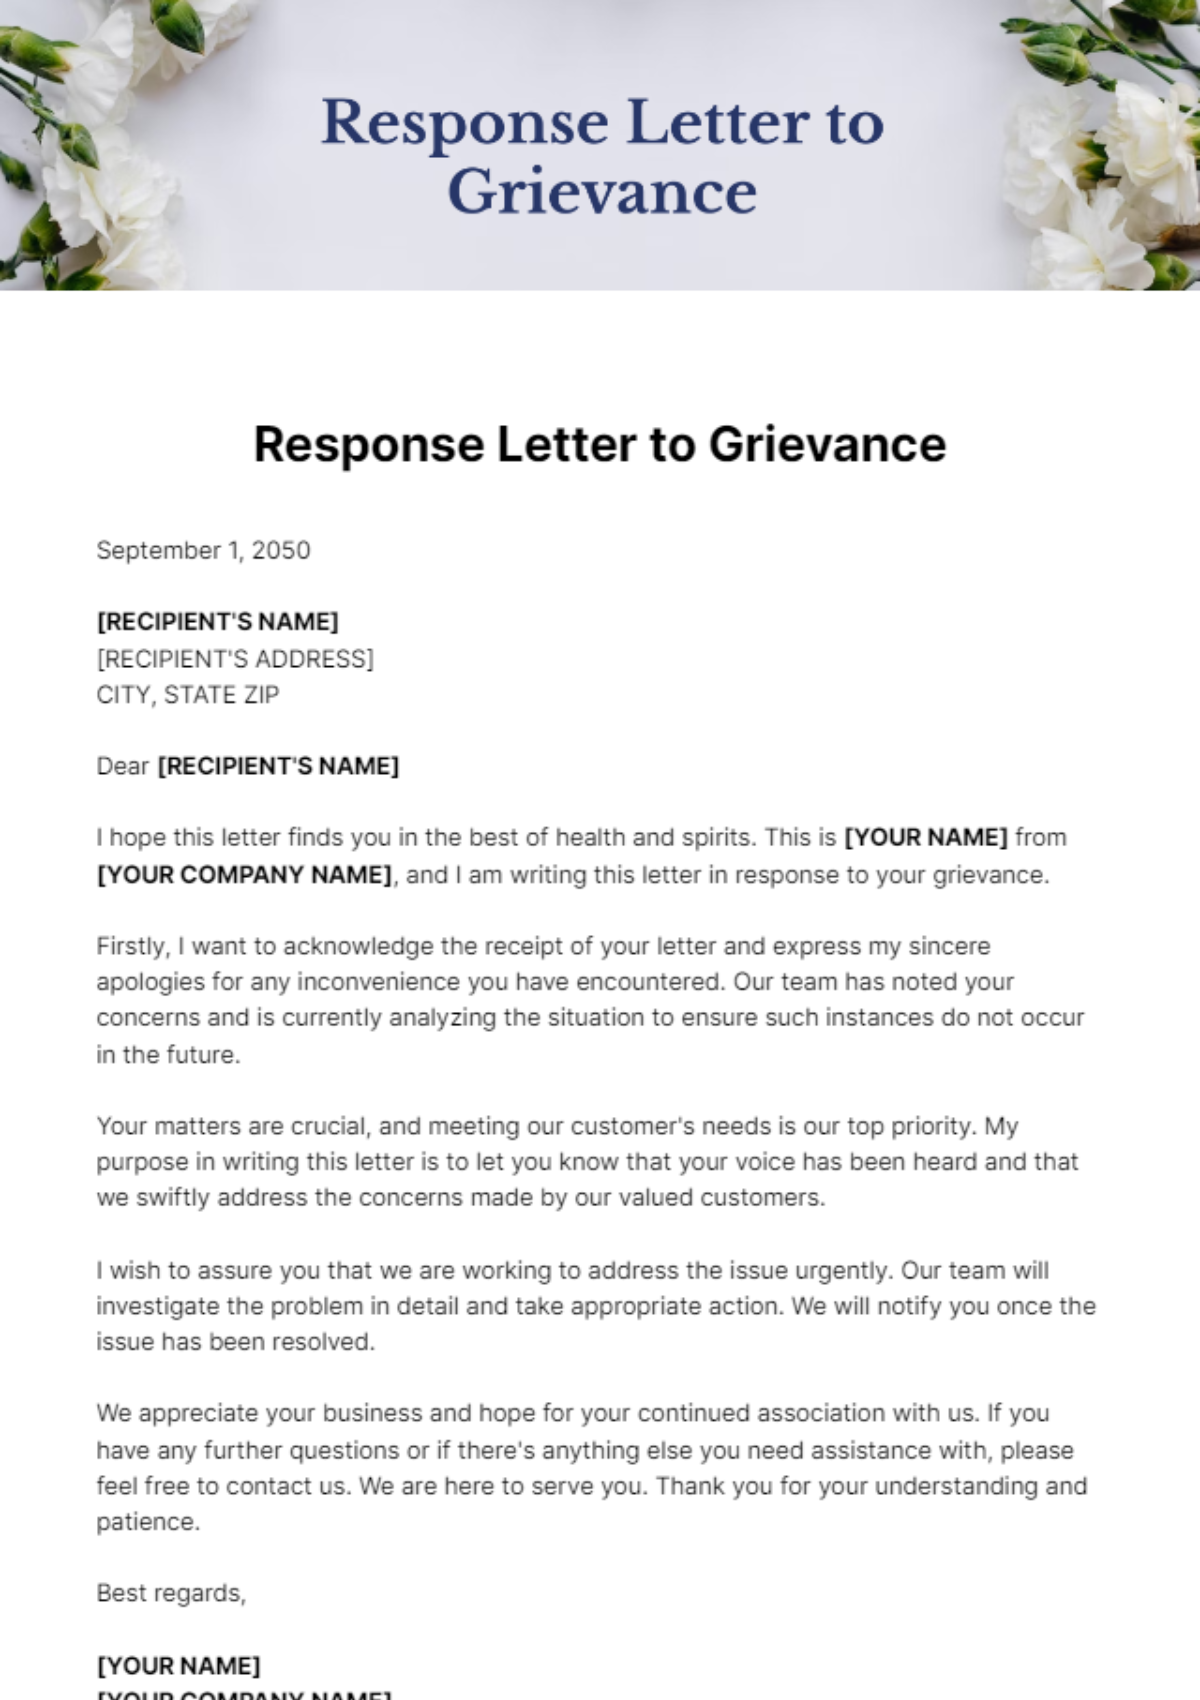 Free Response Letter to Grievance Template